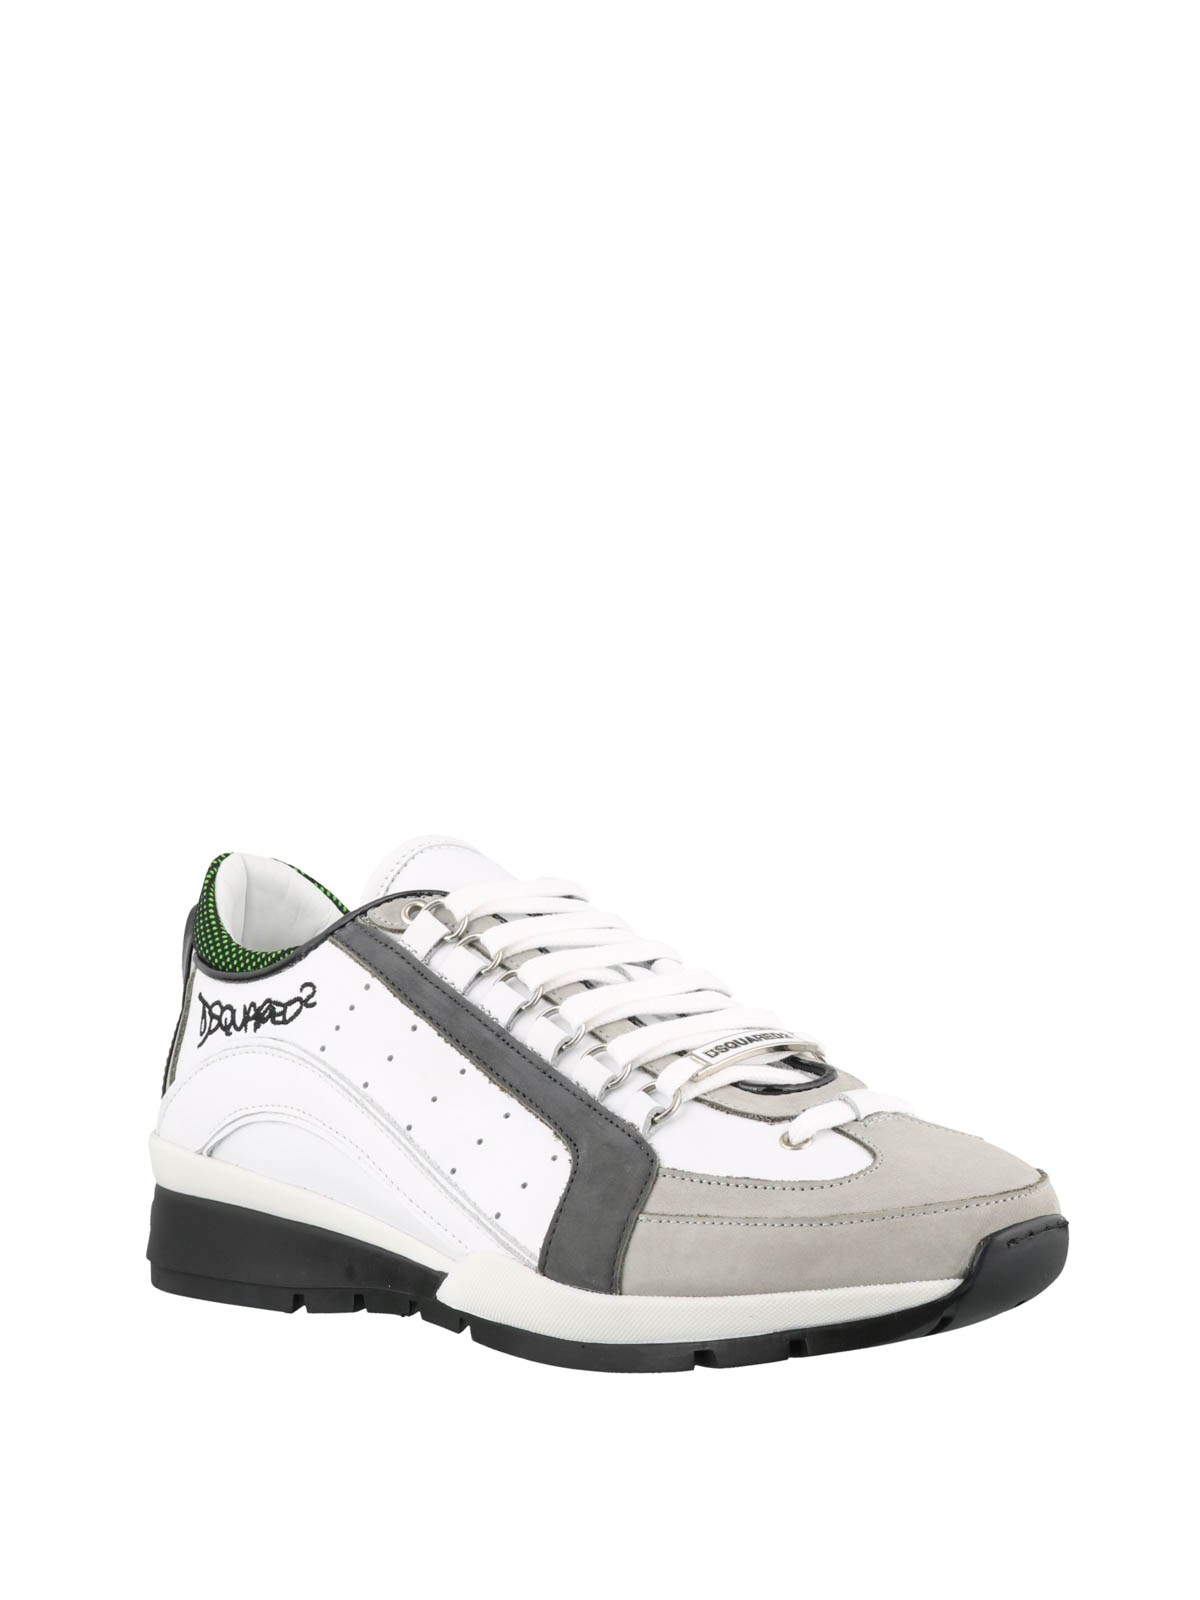 dsquared 551 sneakers white